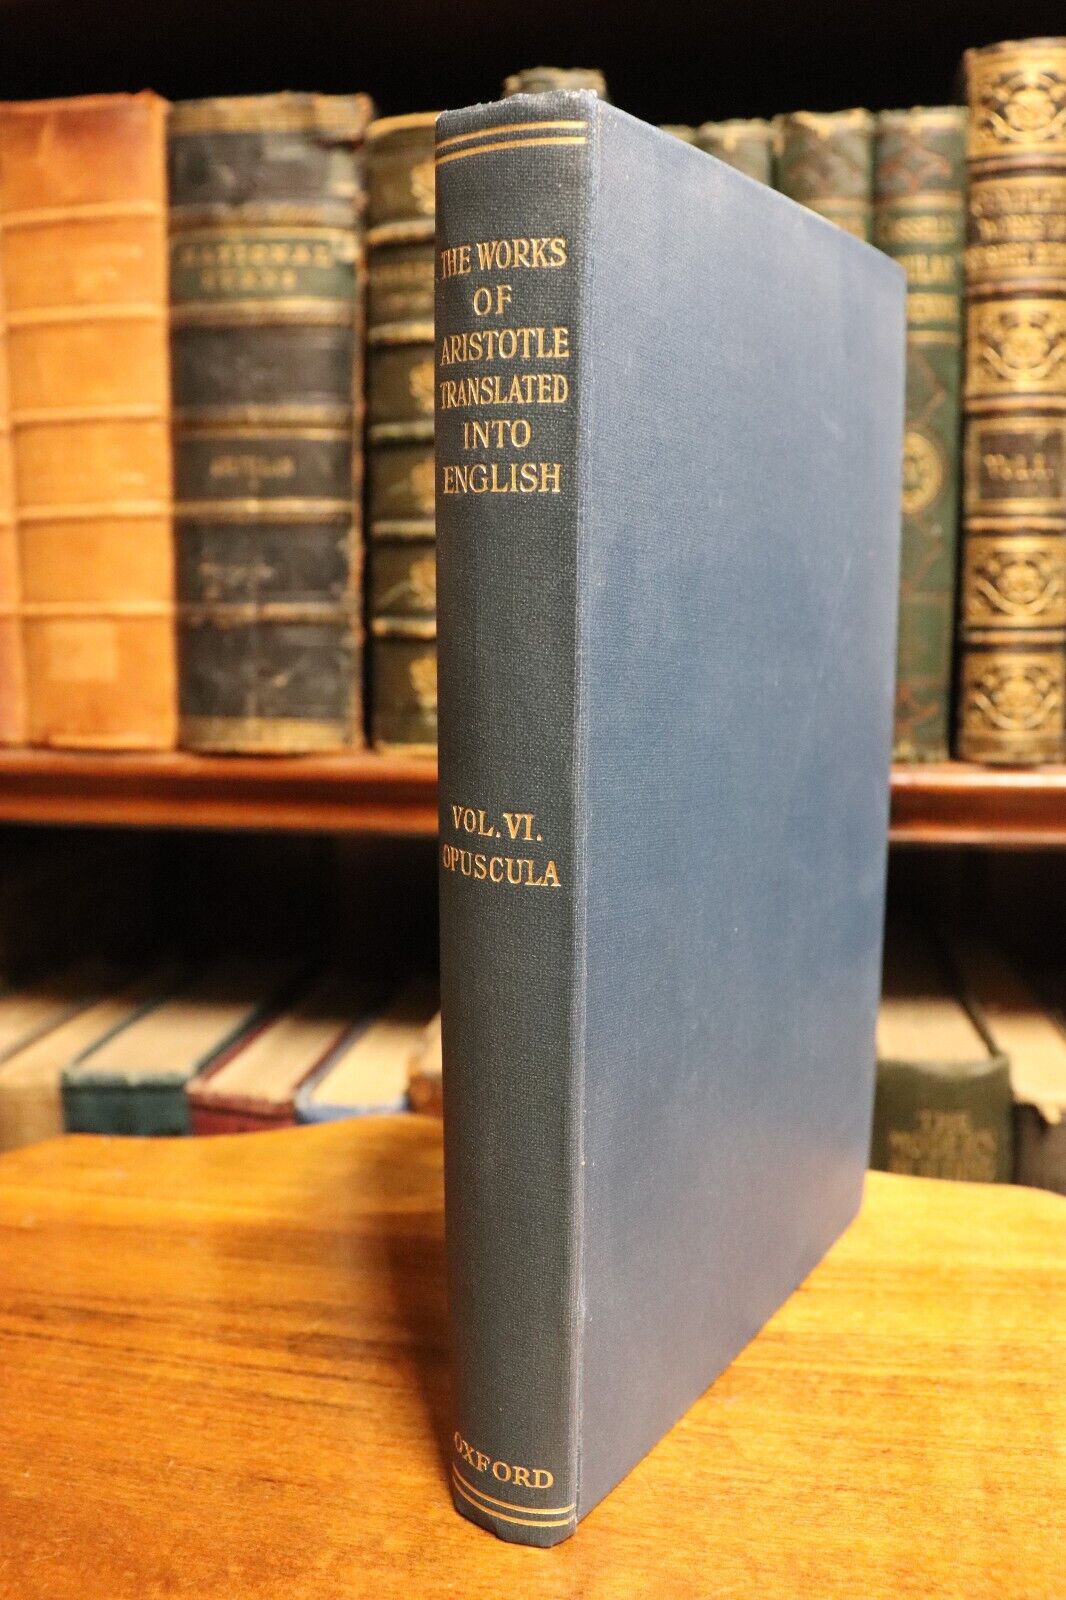 The Works Of Aristotle Vol. VI Opuscula - 1913 - 1st Ed. Antique Philosophy Book - 0